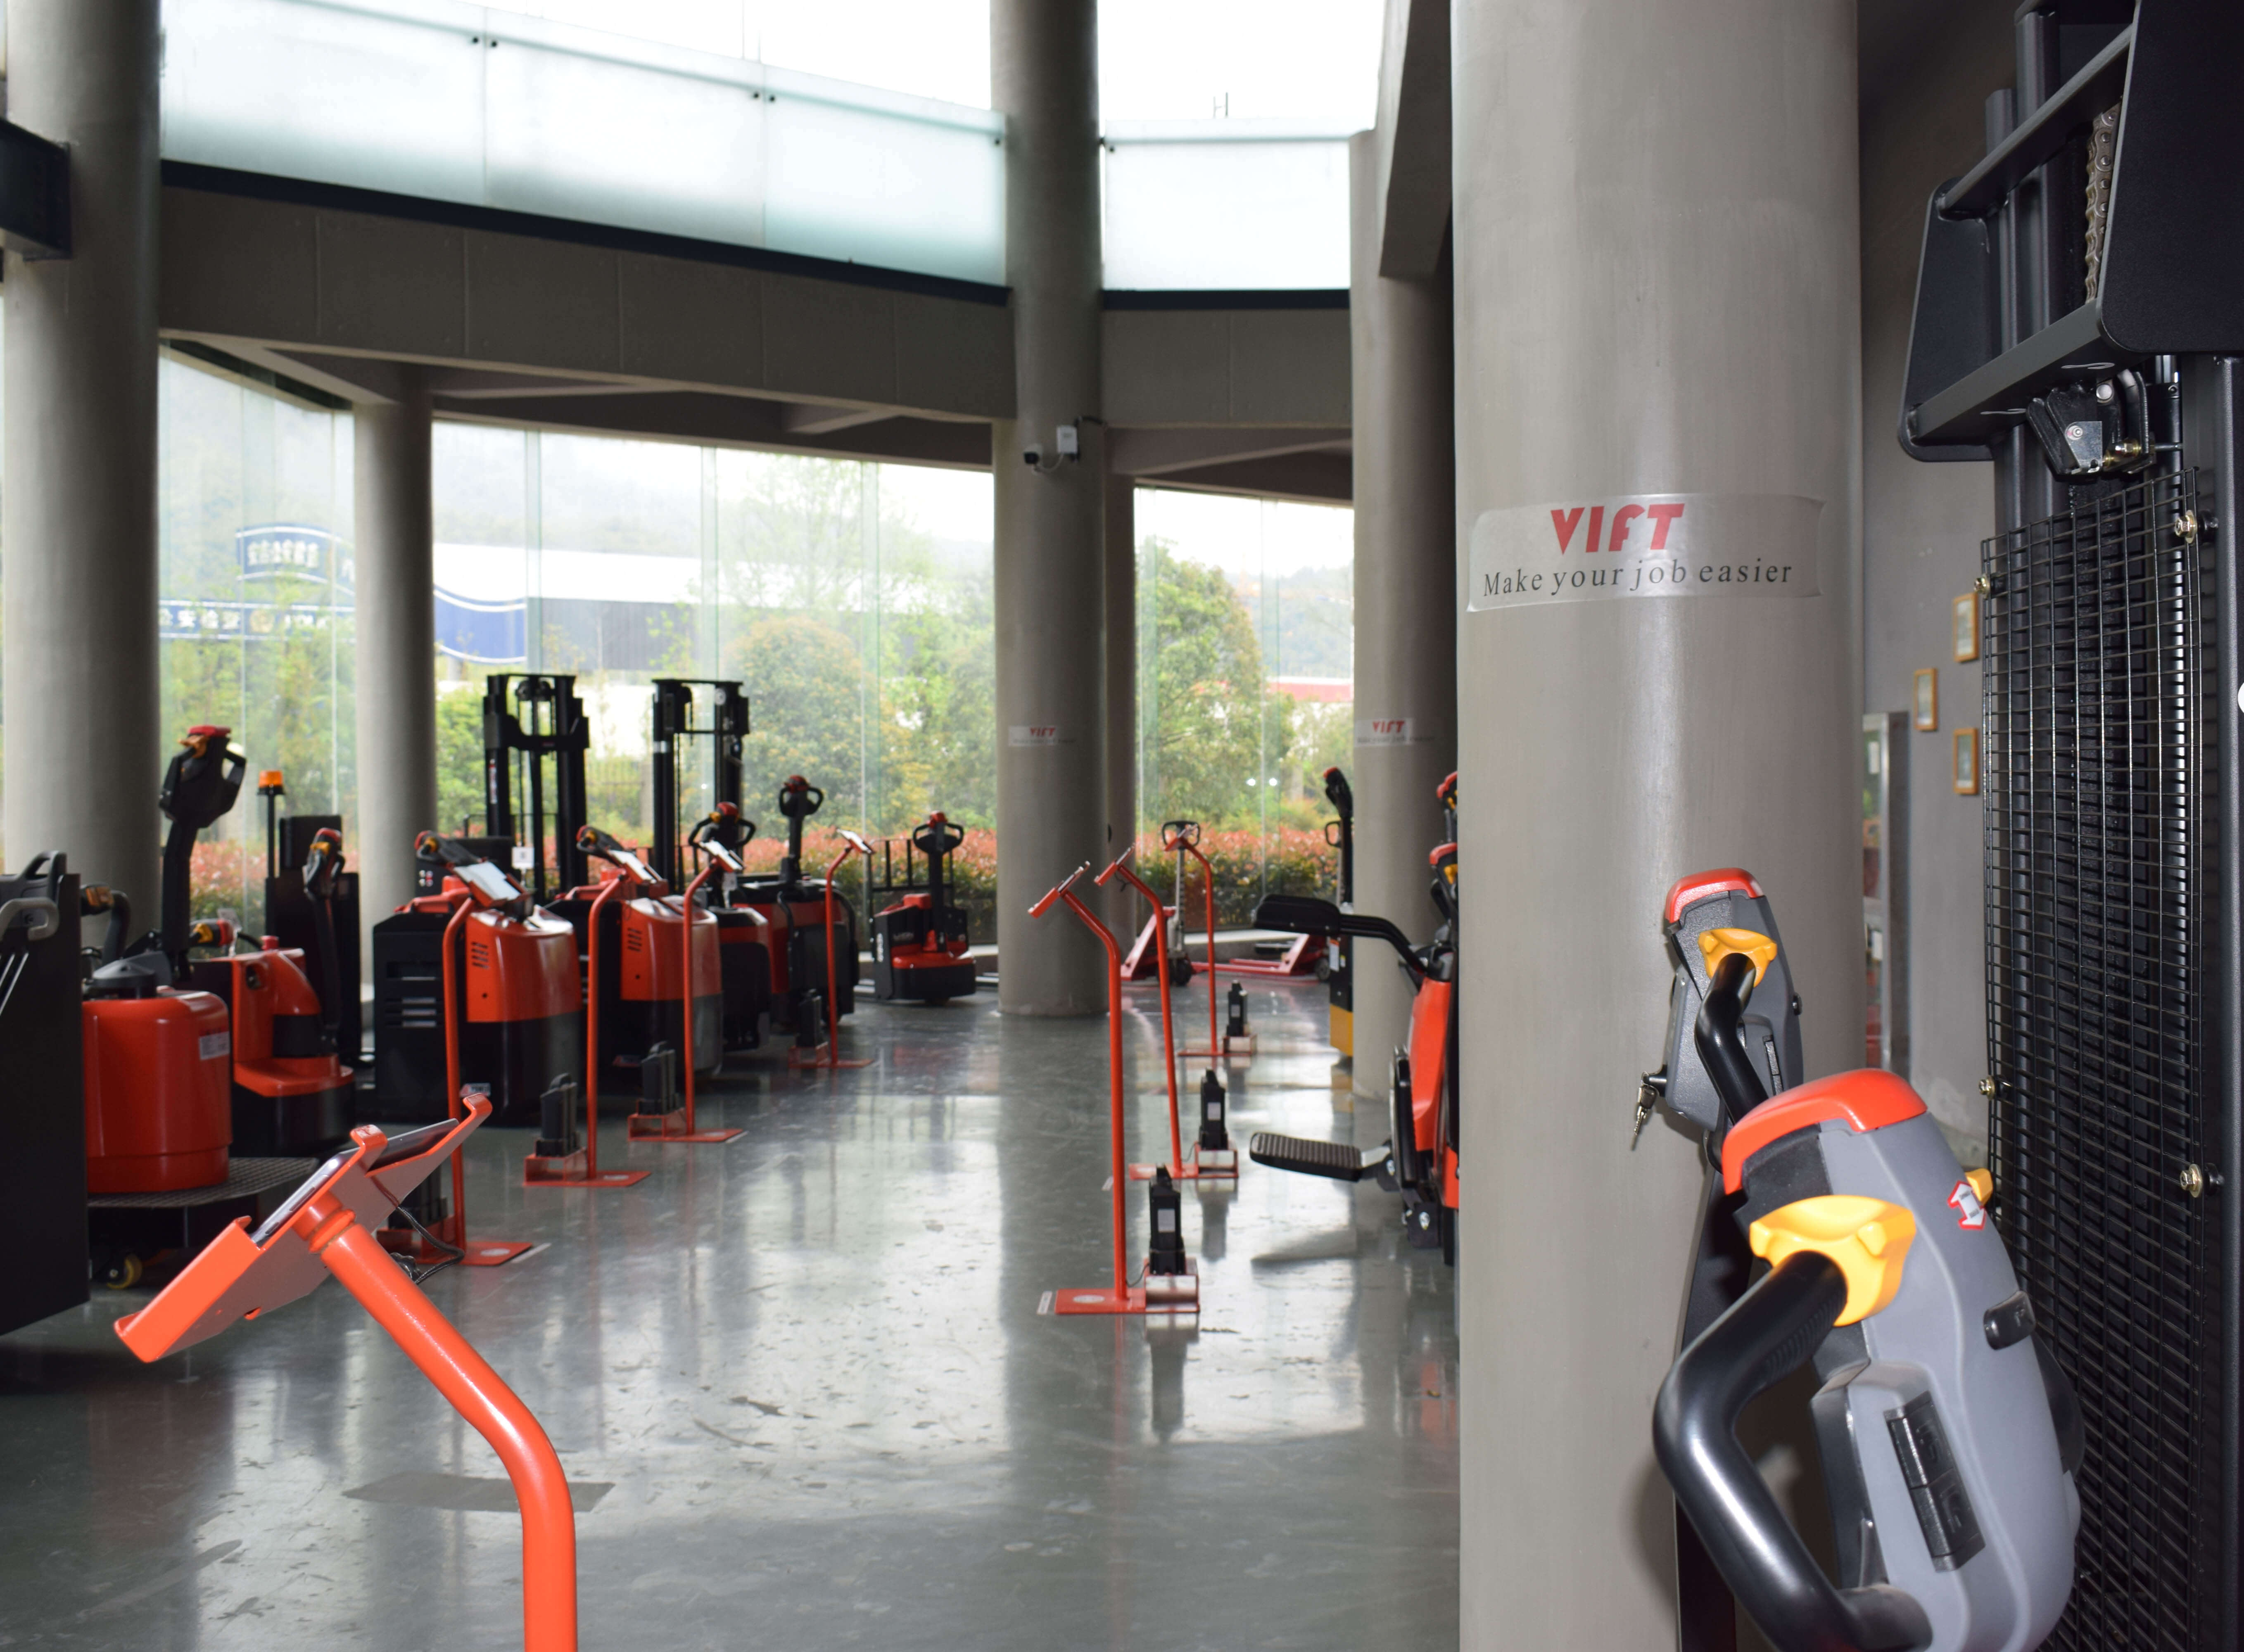 VIFT is waiting for you at Canton Fair